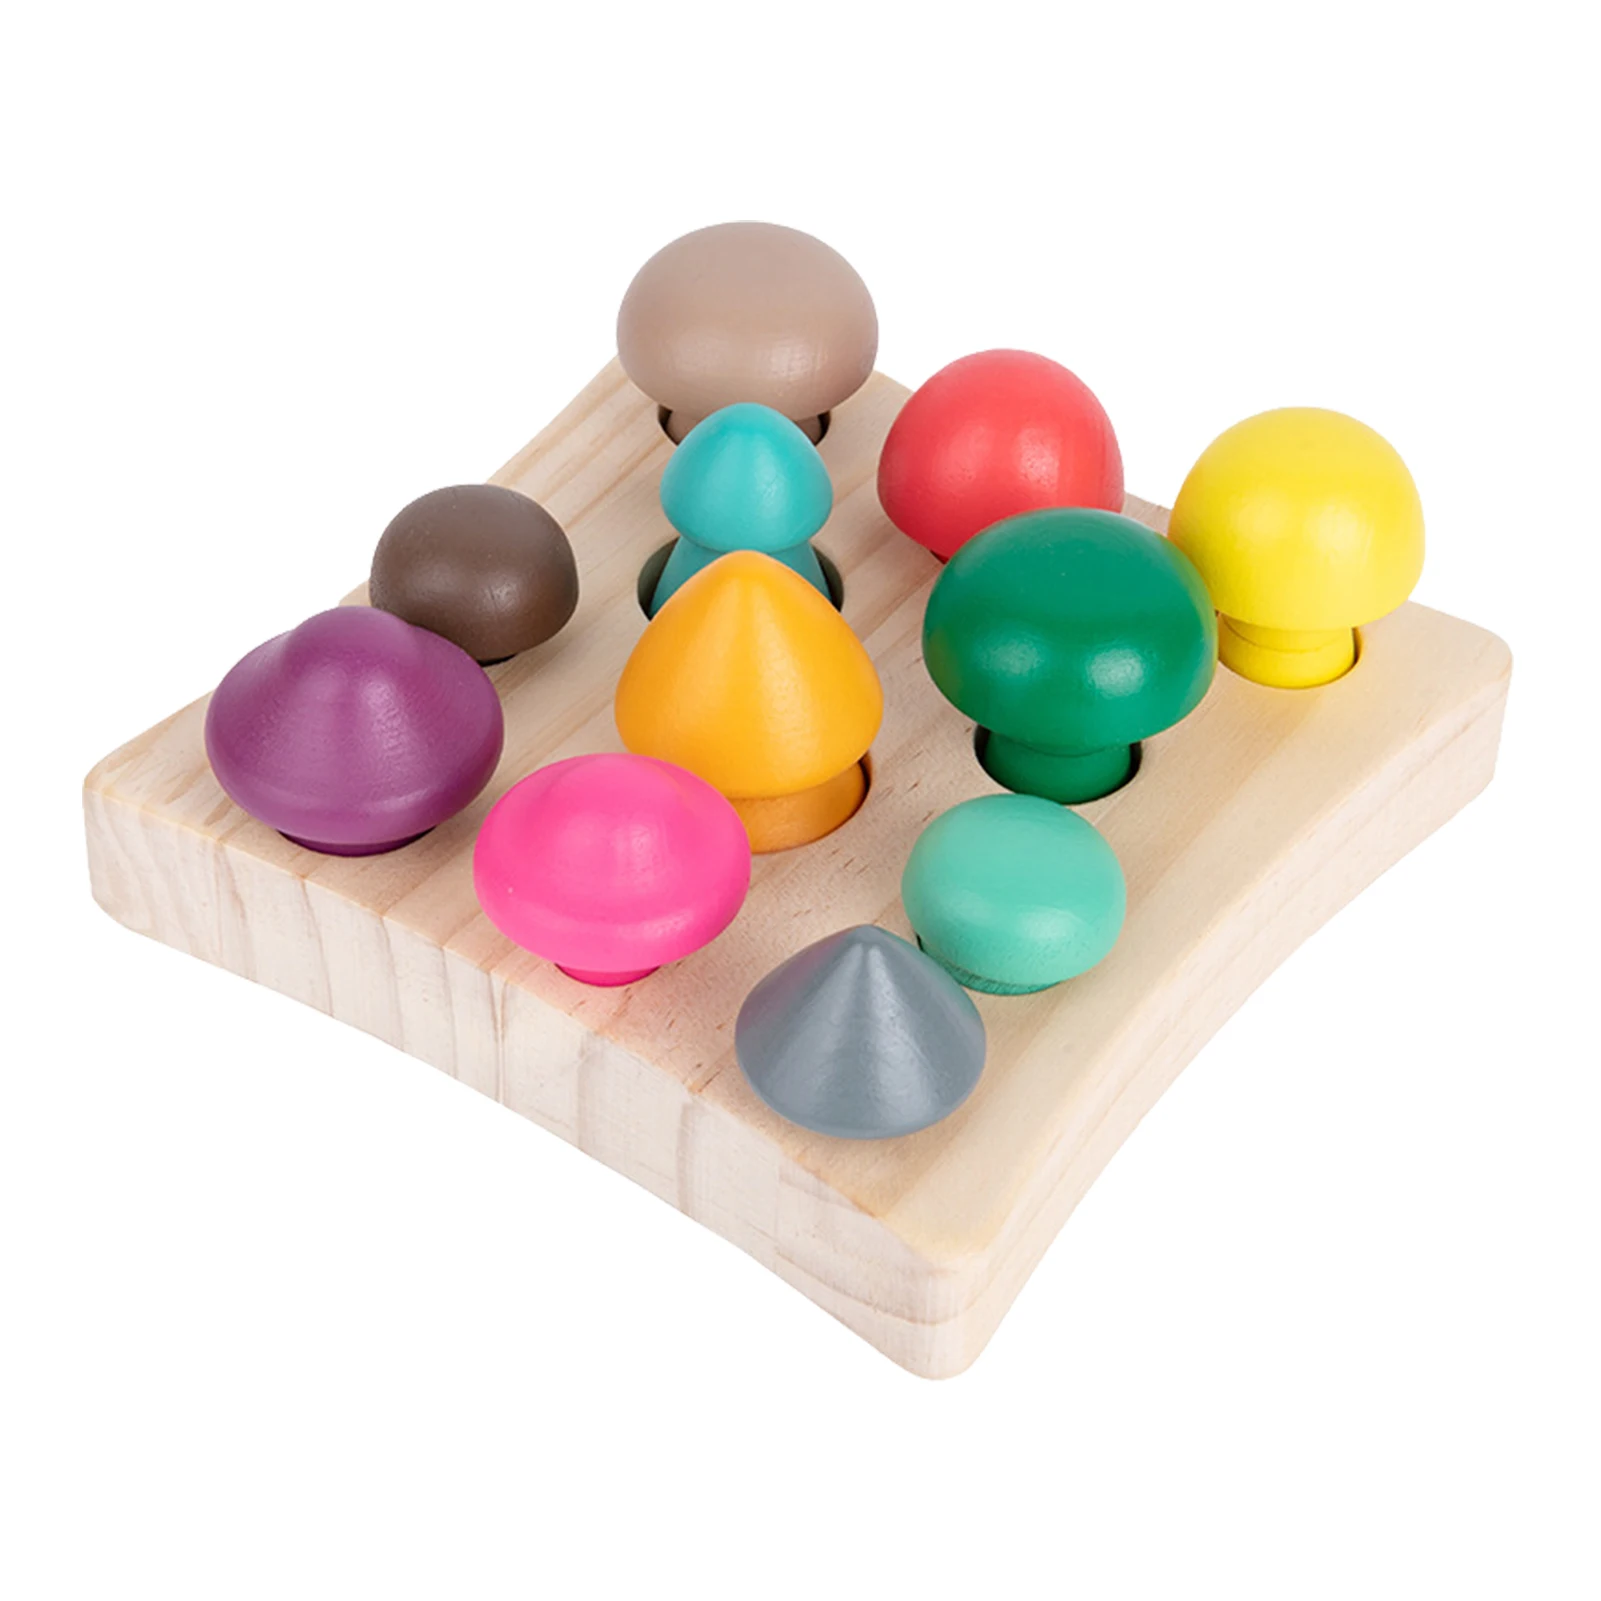 

Shape Sorting Toy Colorful Wooden Mushrooms Mushroom Harvest Game Toddlers Early Development Fun Matching Game For Boys And